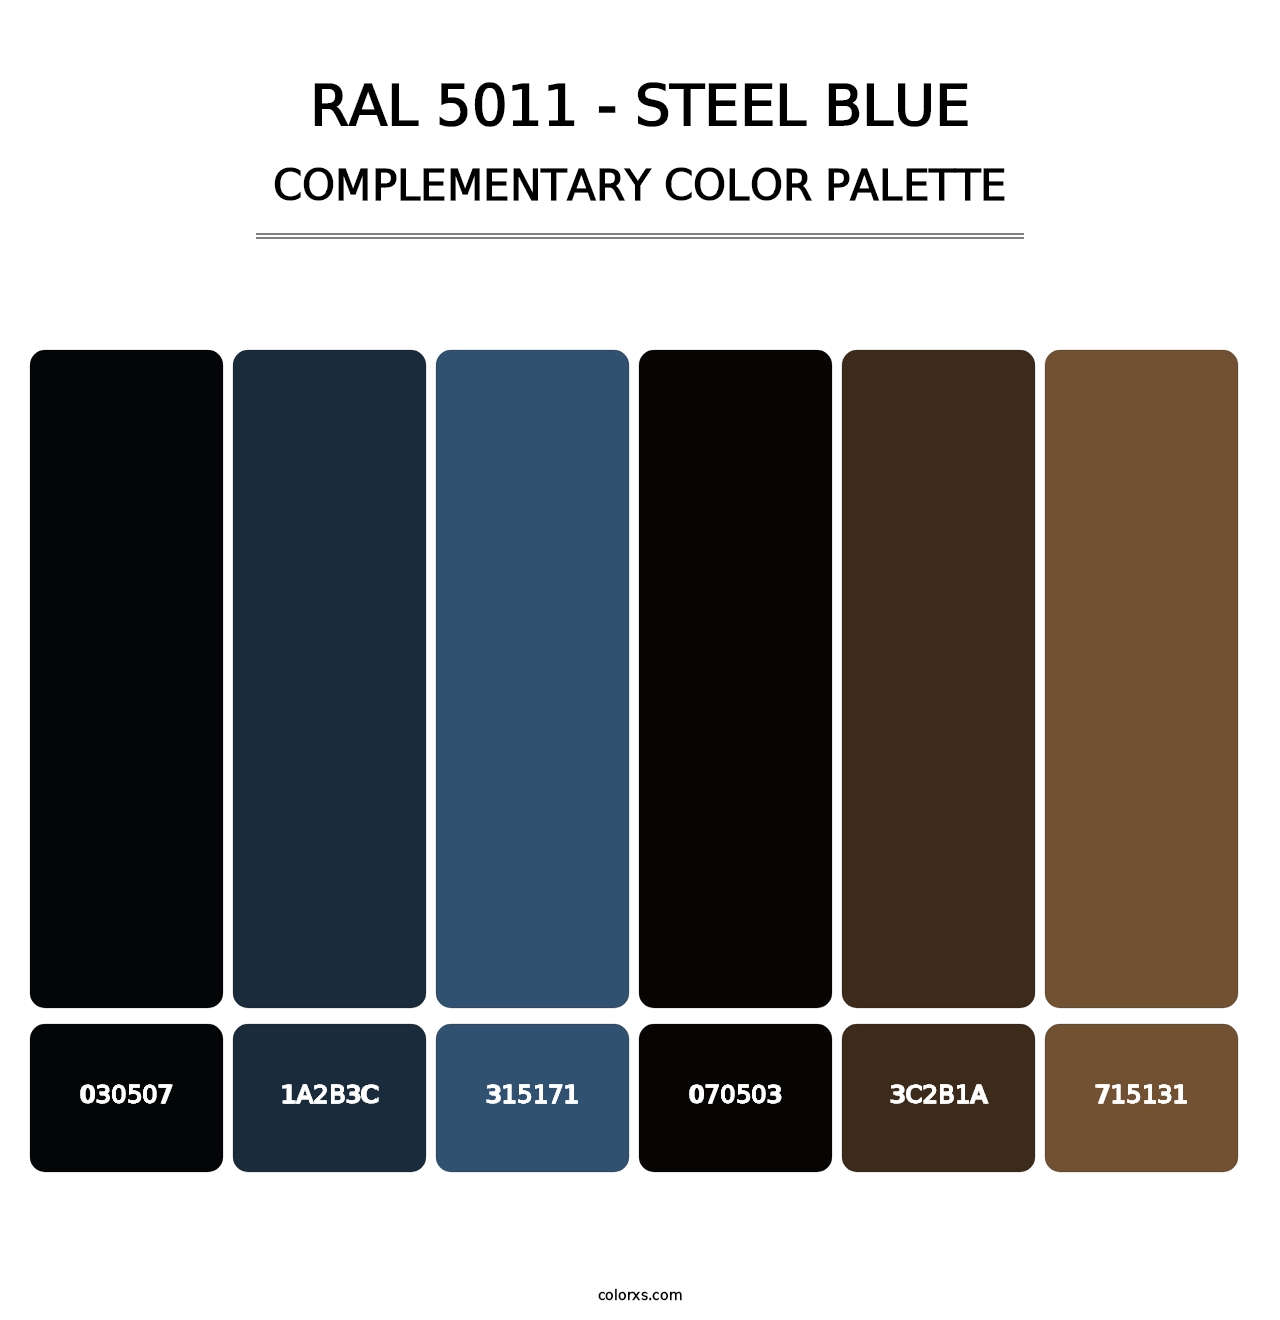 RAL 5011 - Steel Blue - Complementary Color Palette